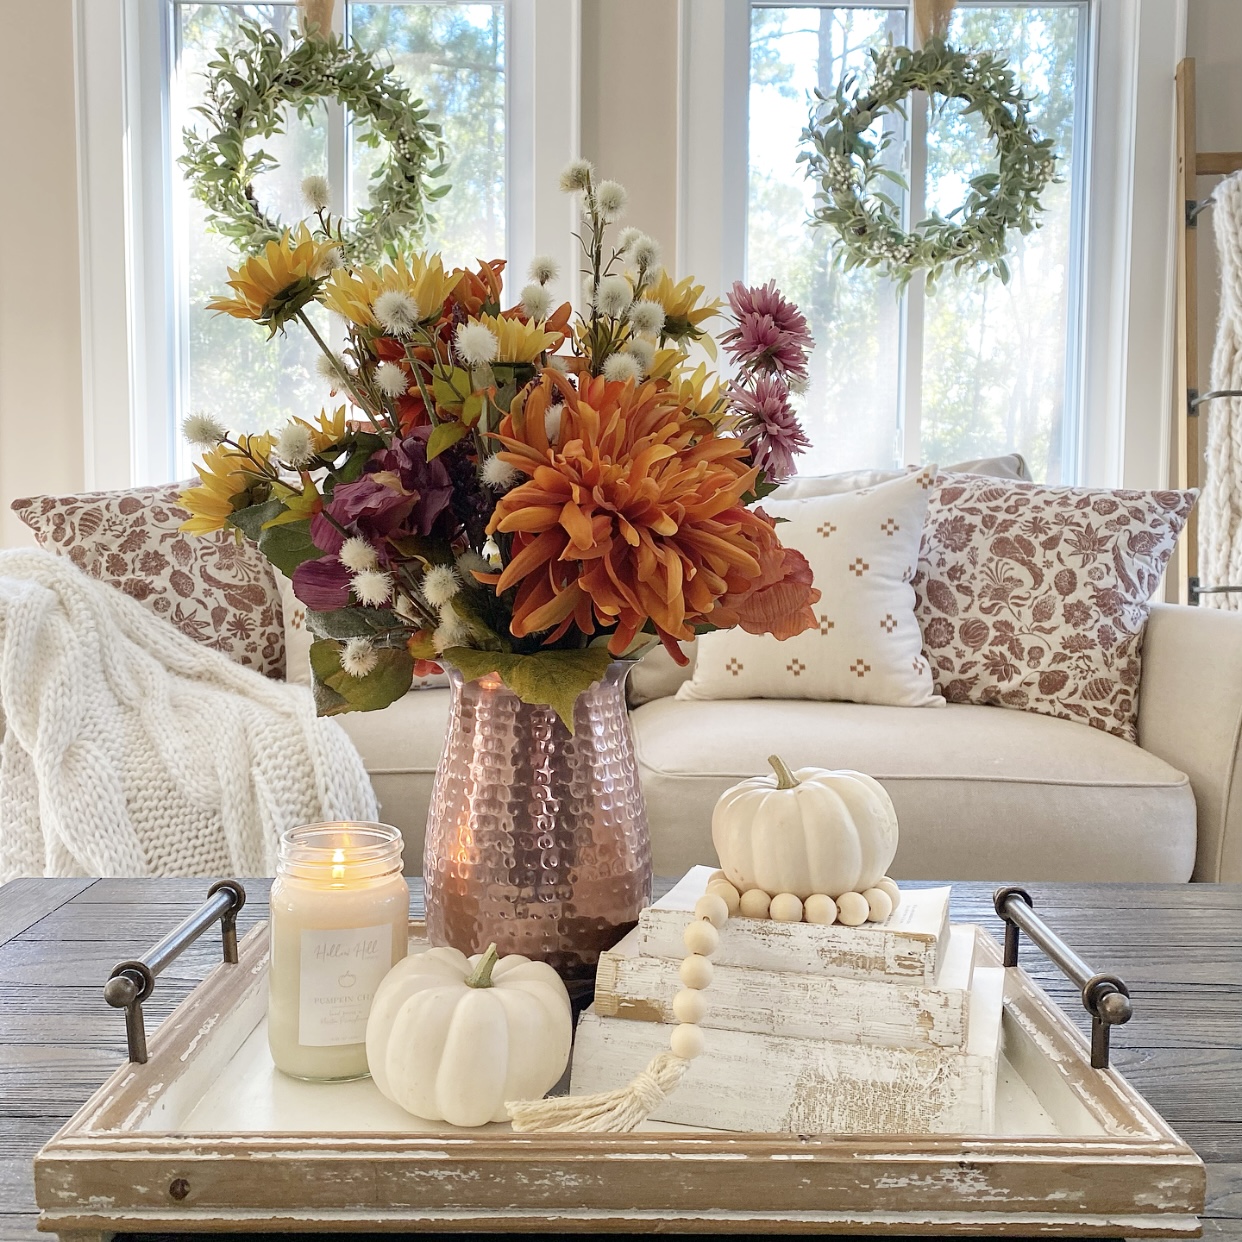 A Fall vignette with flowers in a copper pitcher, vintage books, pumpkins, wood beads, and a candle on a tray on the coffee table in front of the sofa.